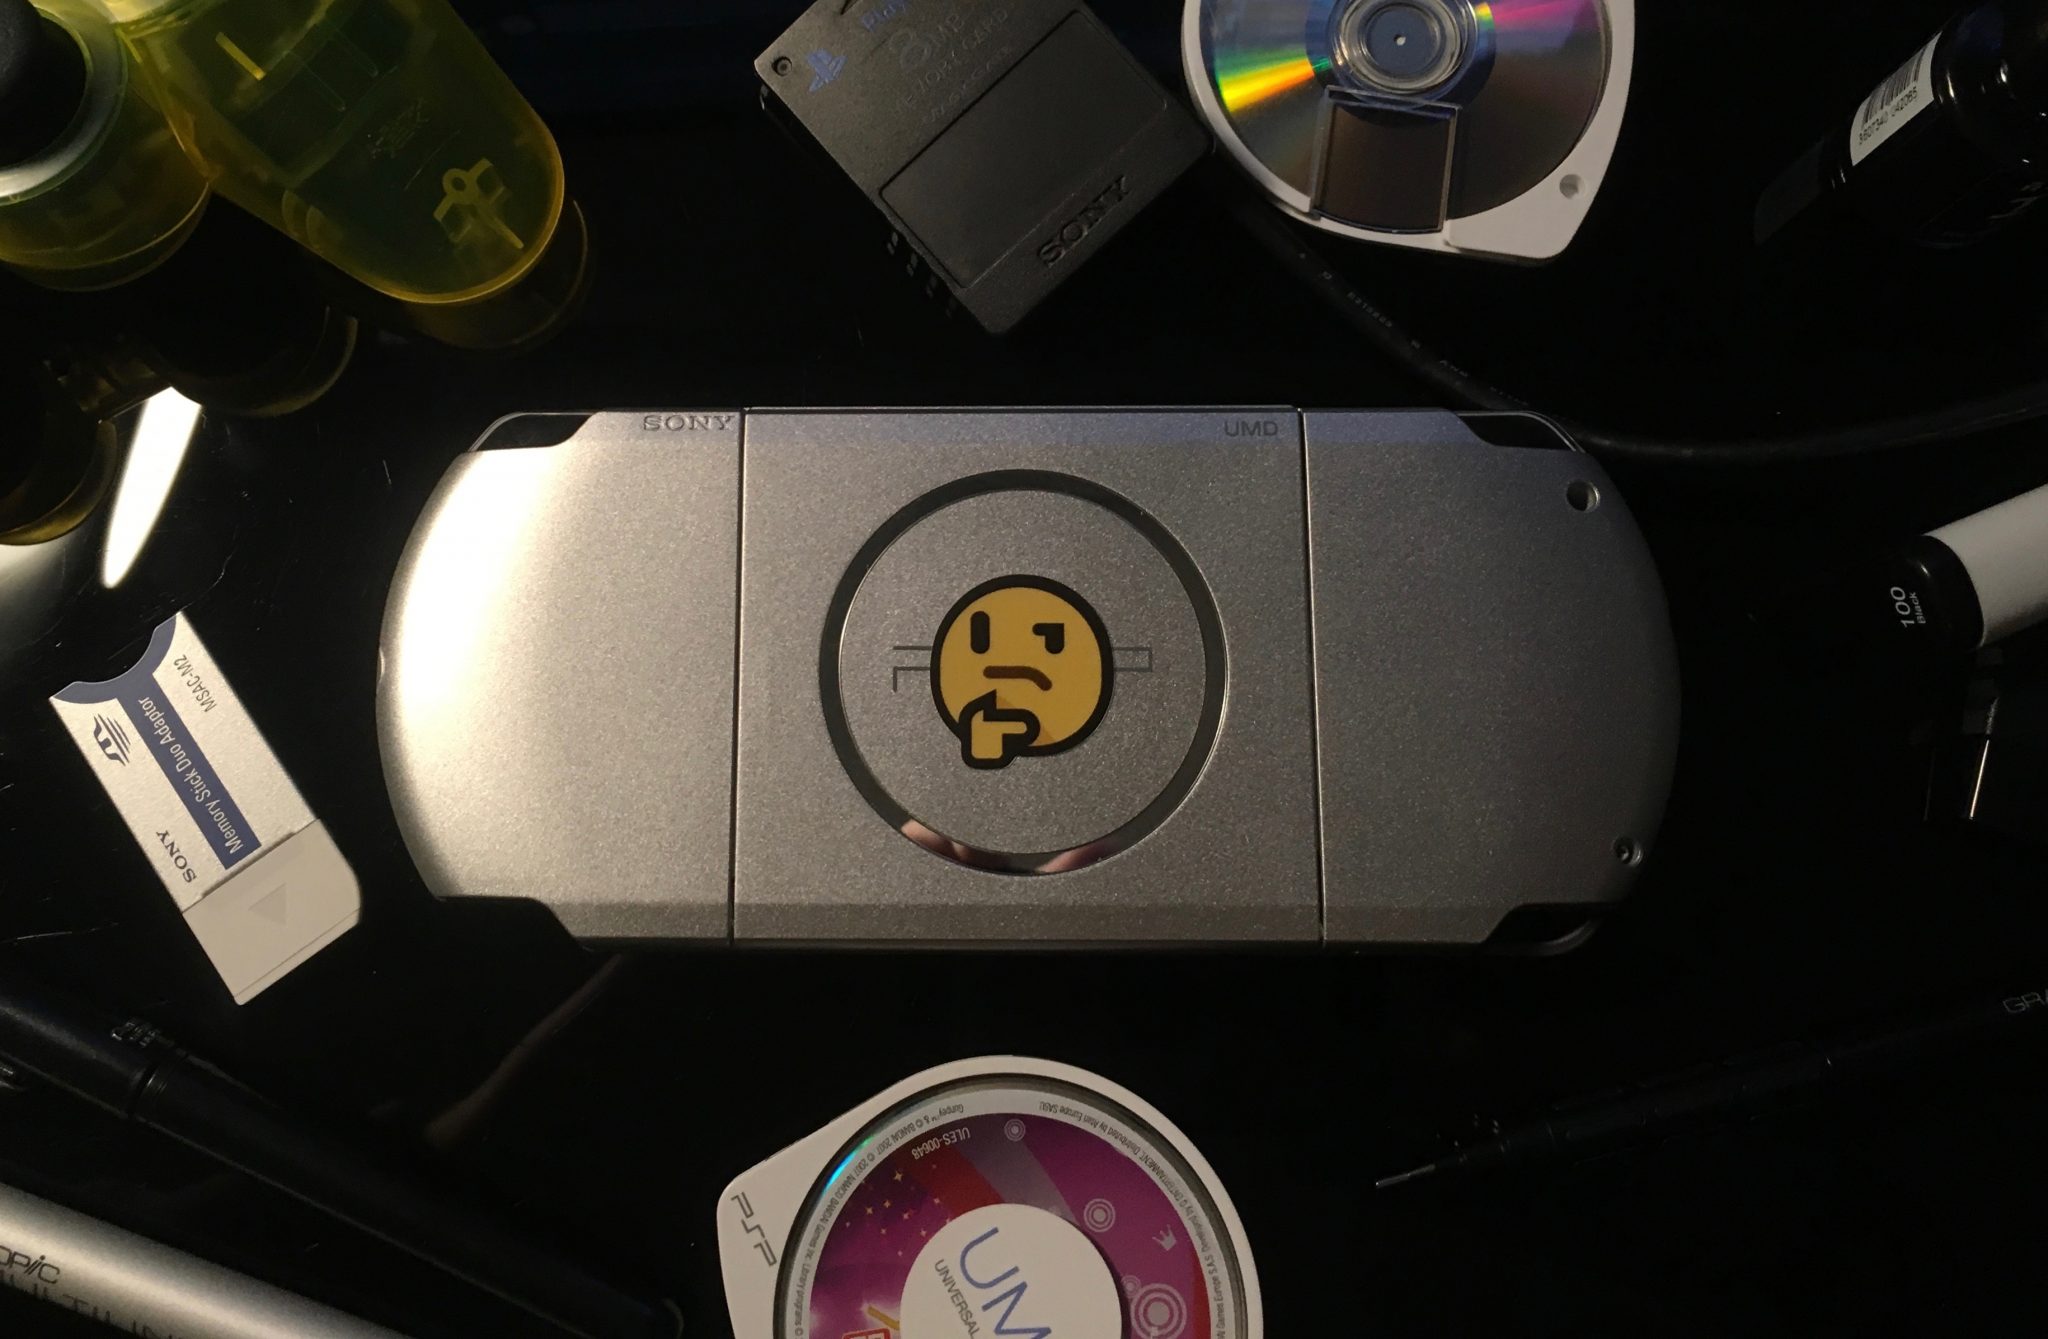 A silver PSP face down on a black glass desk. In the center of the back of a console is a thinking emoji sticker. Surrounding it are different scattered objects - a transparent yellow PlayStation 2 controller, UMDs, a PS2 memory card, black nail varnish, a Memory Stick Duo to Memory Stick adaptor, and various kinds of pens and pencils.